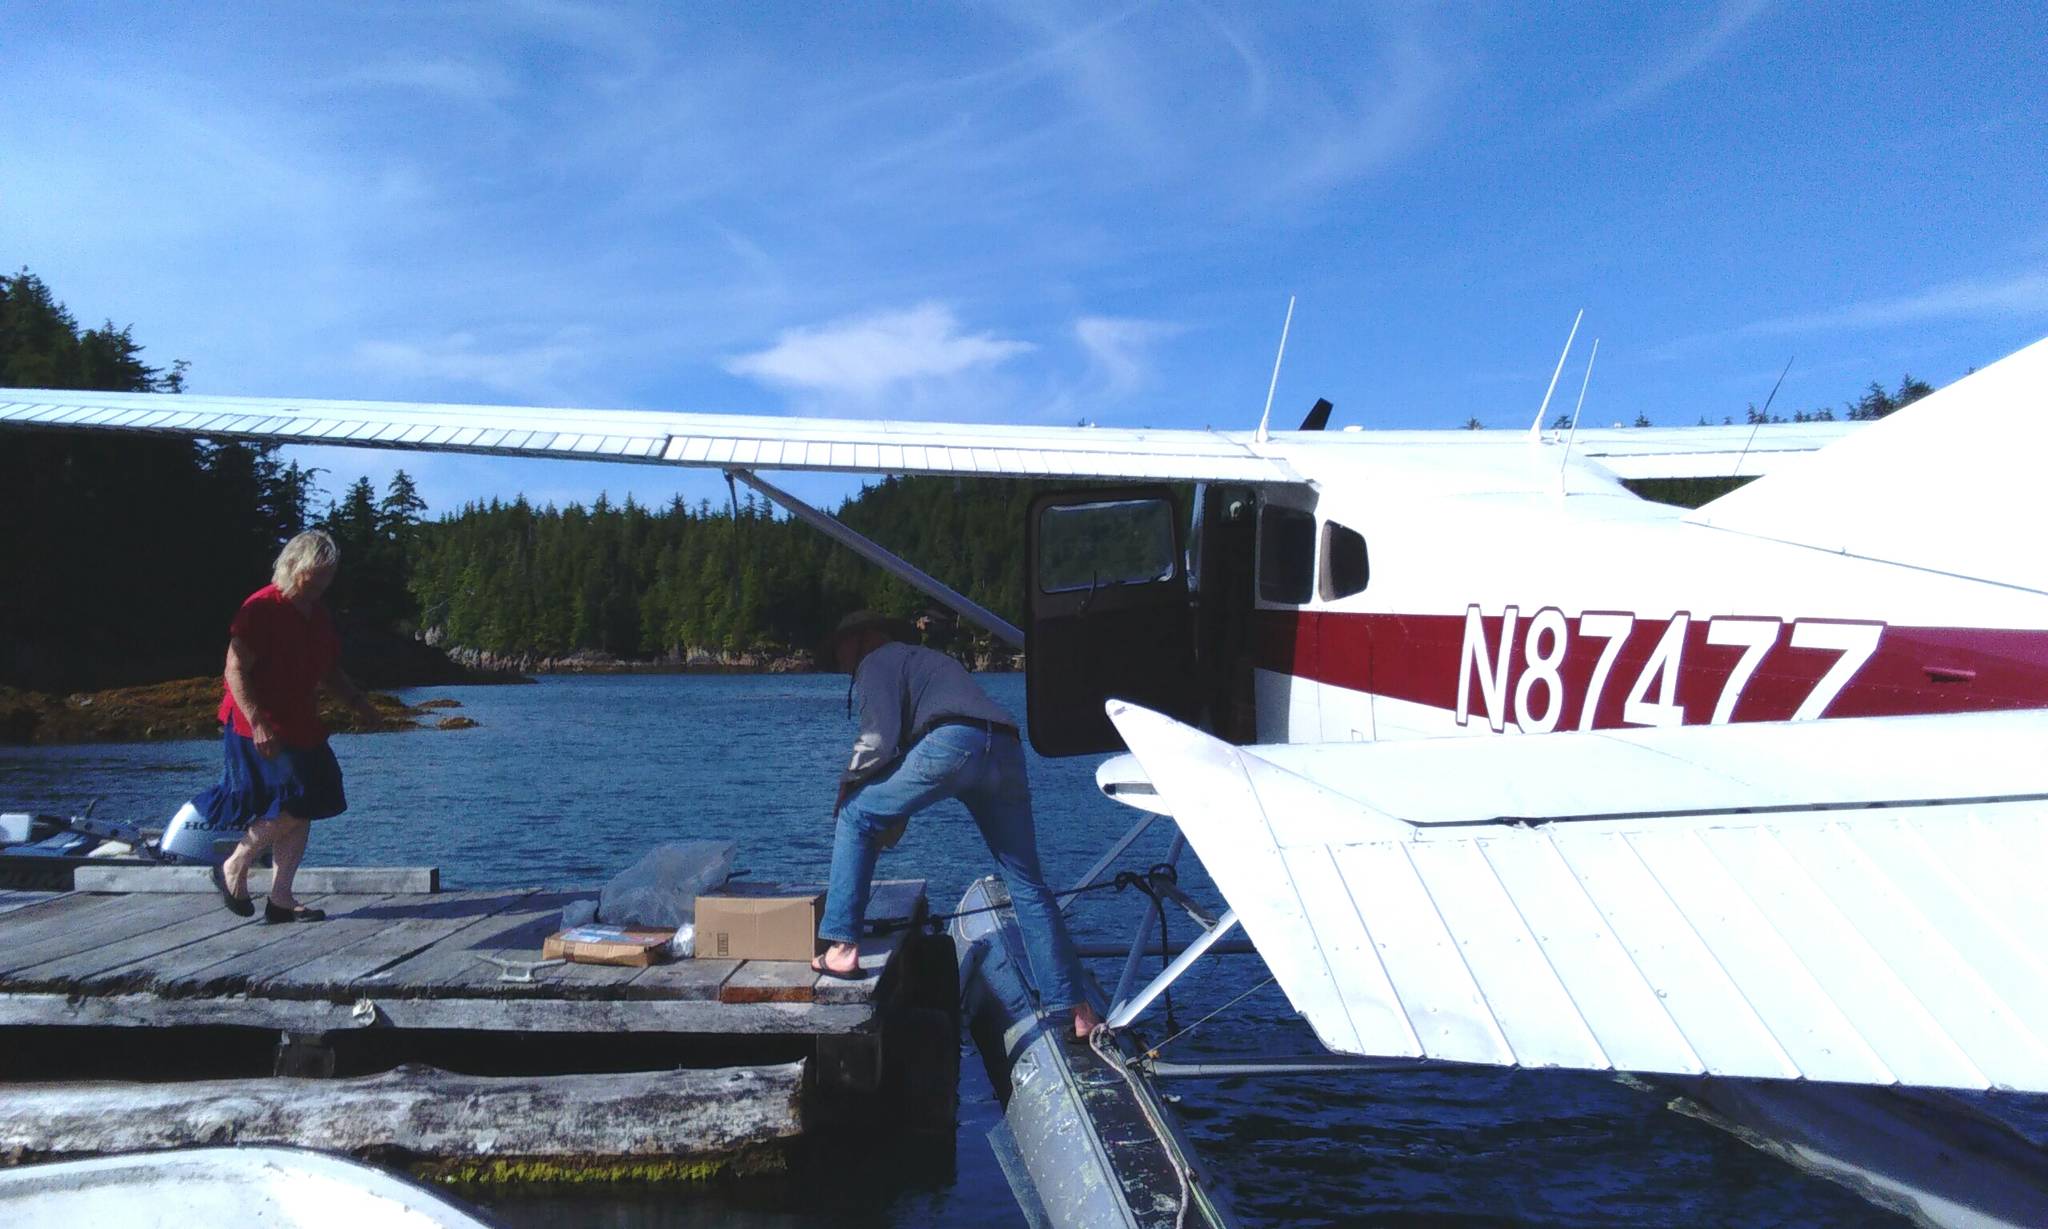 Post Mistress of Meyers Chuck, Cassie Peavey, greets the floatplane pilot and helps him unload this week’s mail. (Tara Neilson | For the Capital City Weekly)